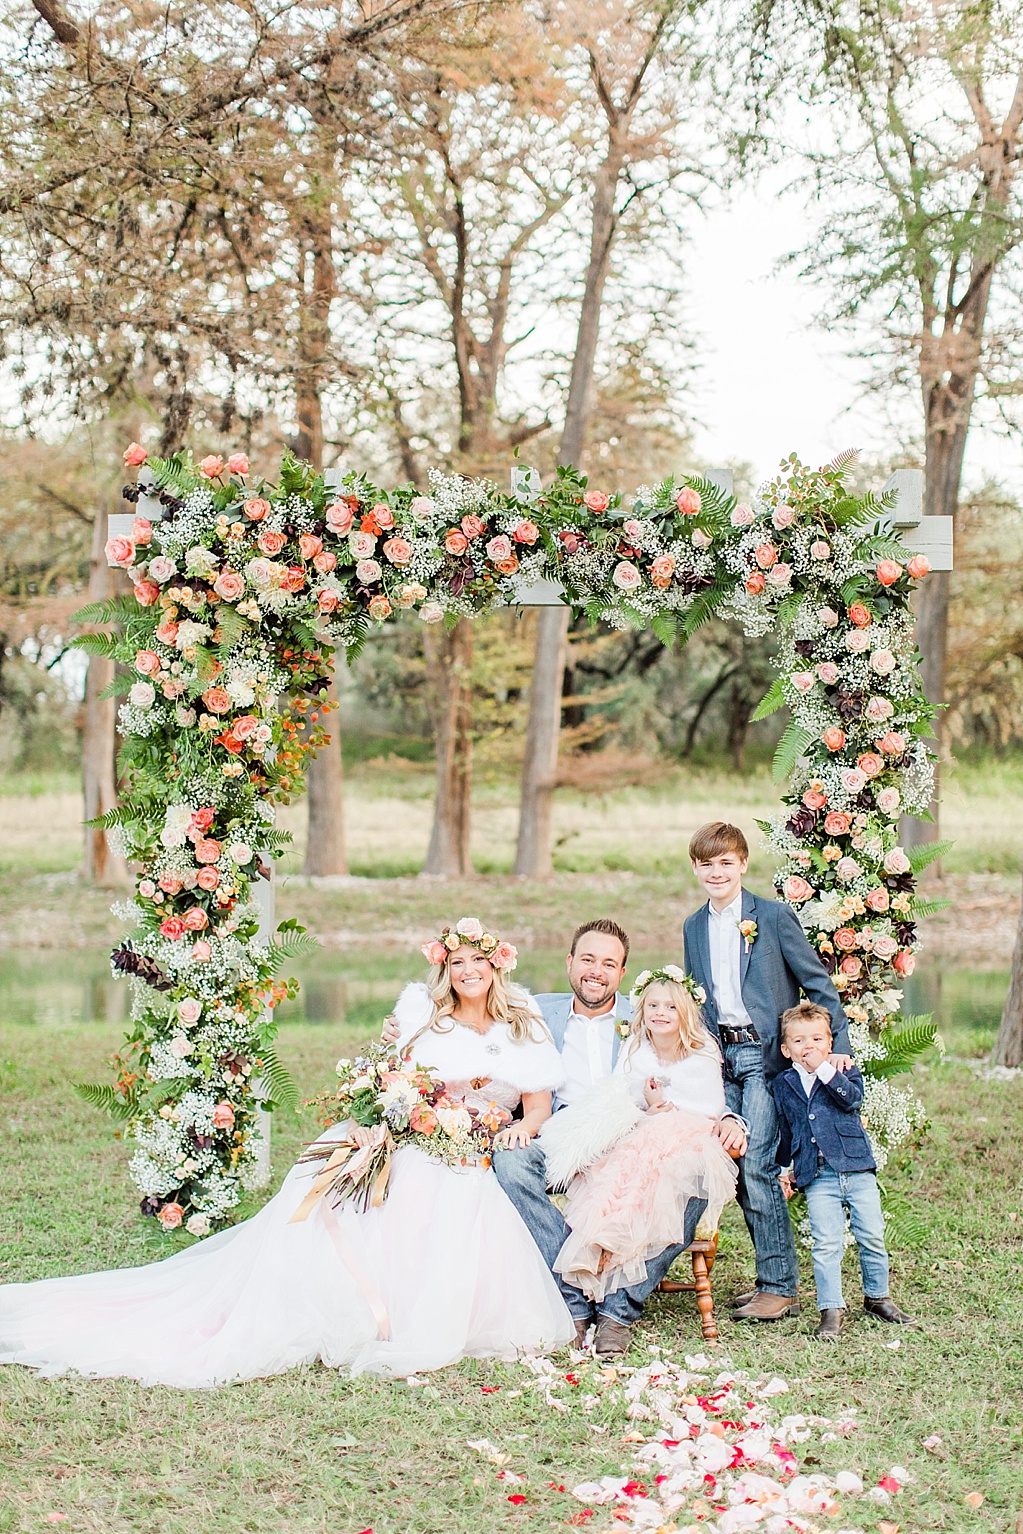 Intimate Fall wedding with over the top flowers in Utopia Texas by Allison Jeffers Photography 0080